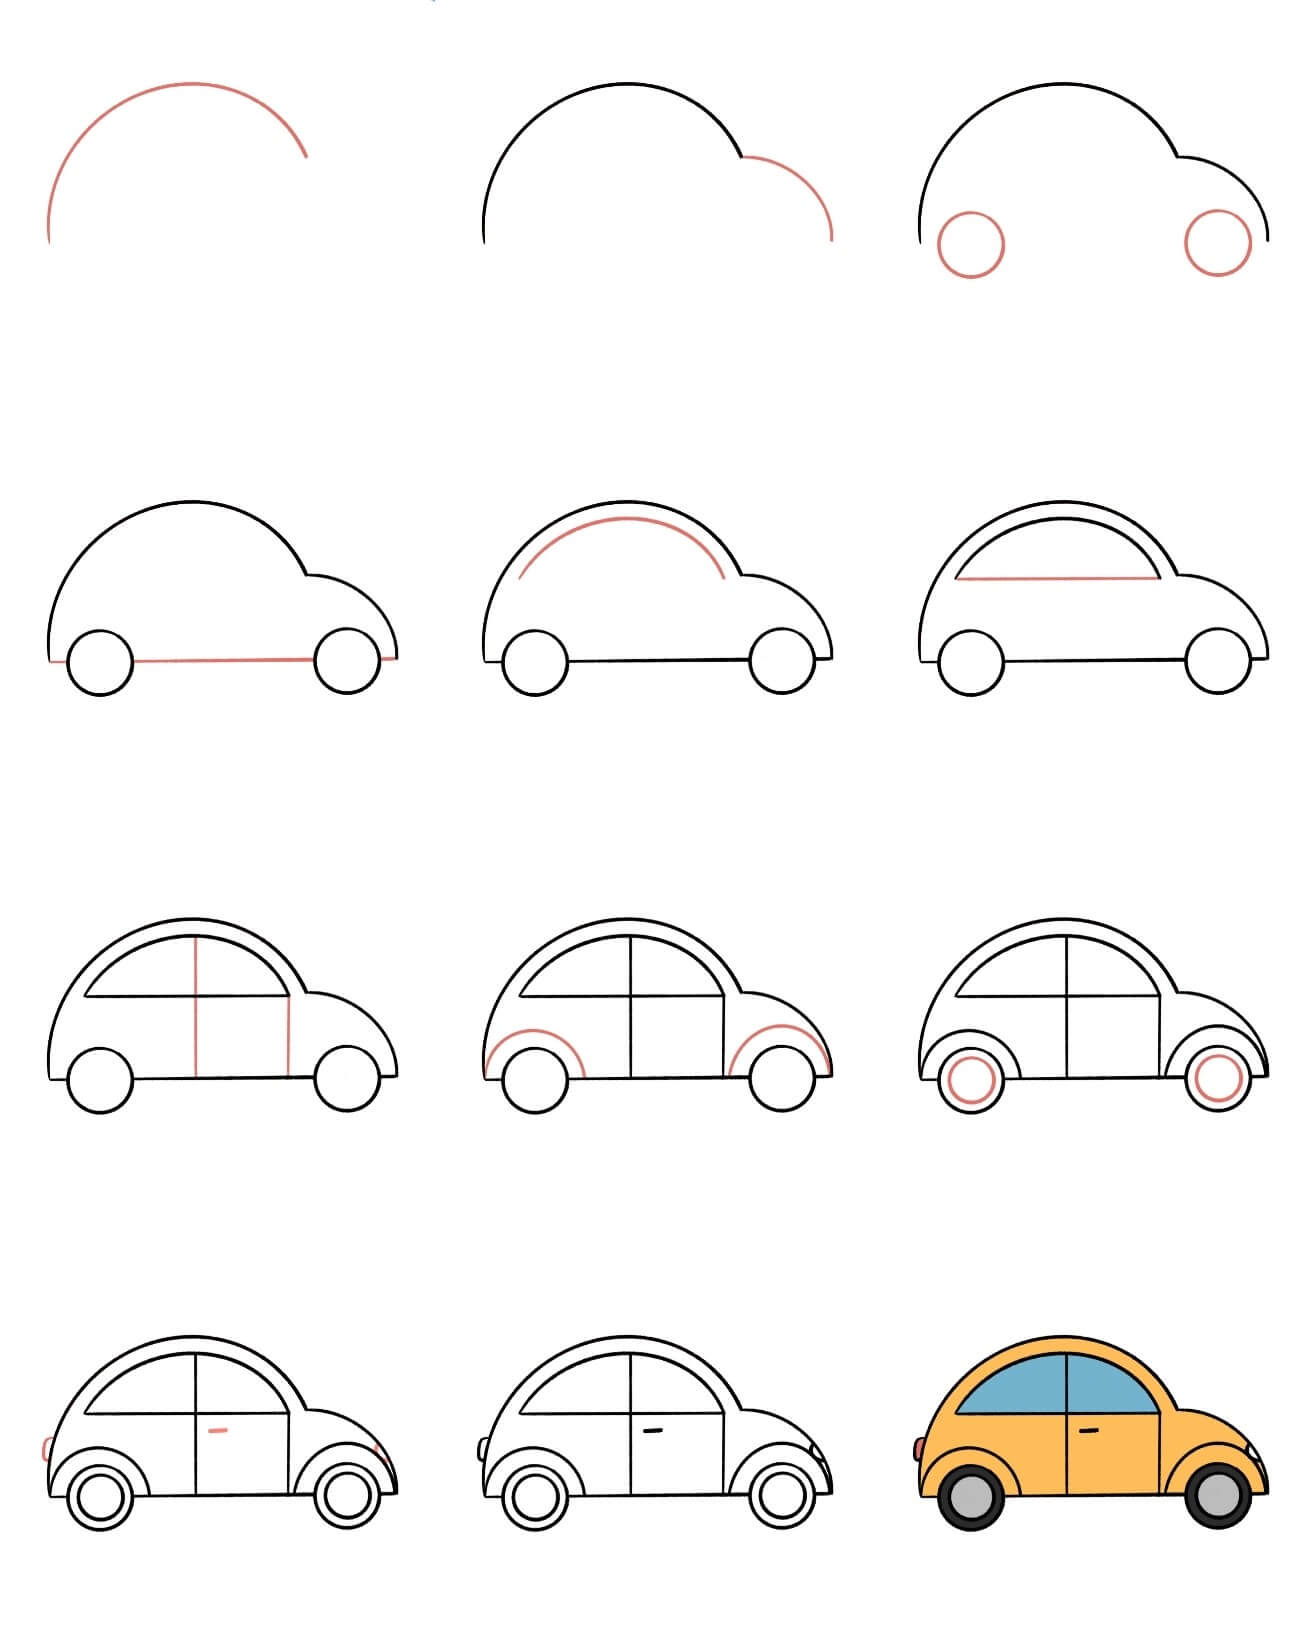 How to draw Round car